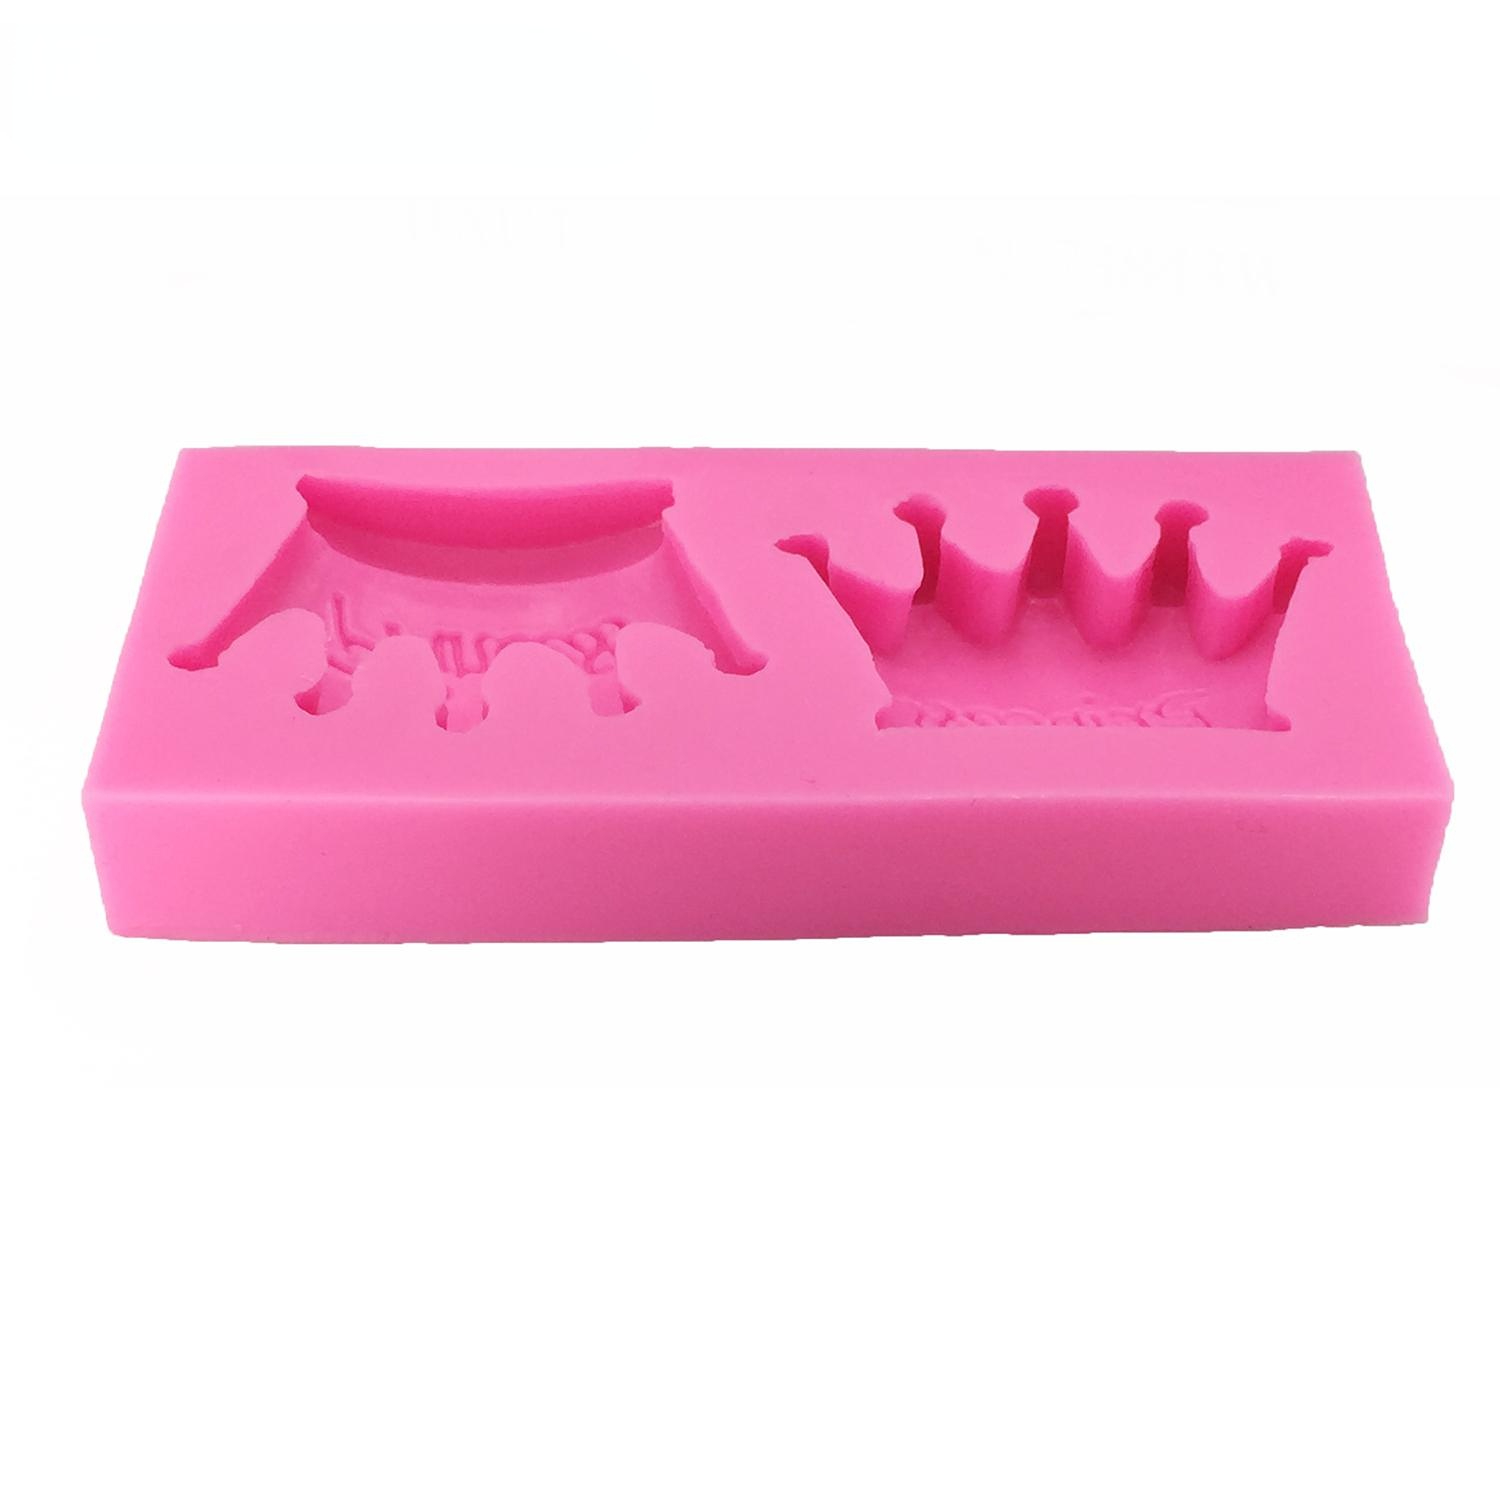 Best Cake Decorating Tools, Stencils, Fondant Tools and Silicone Molds